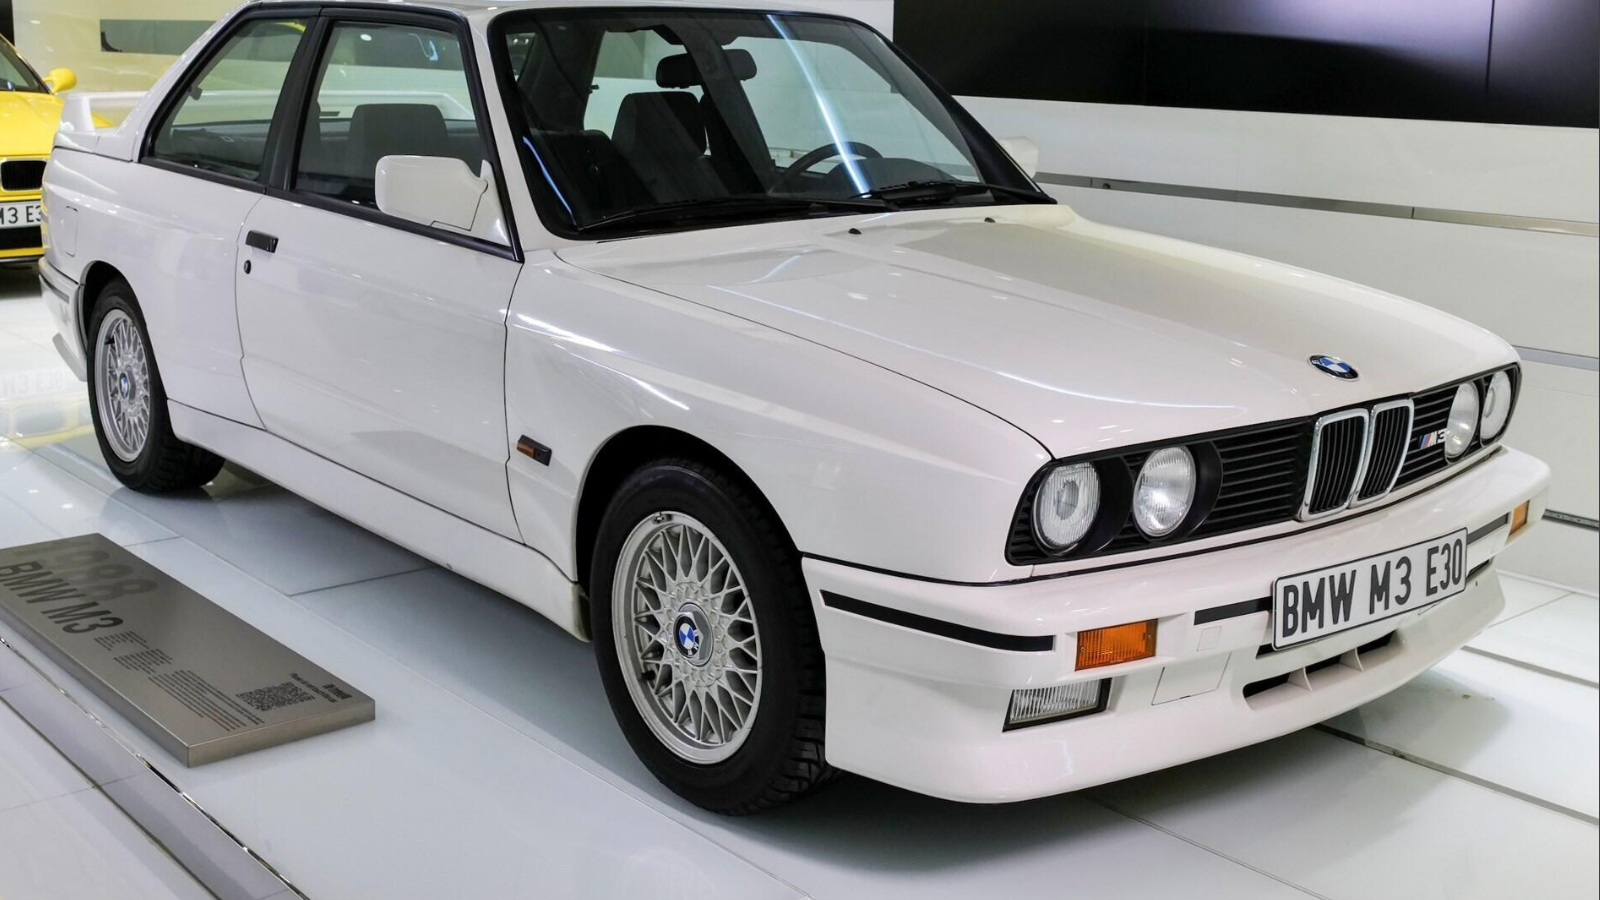 26 classic BMWs for sale – in one auction